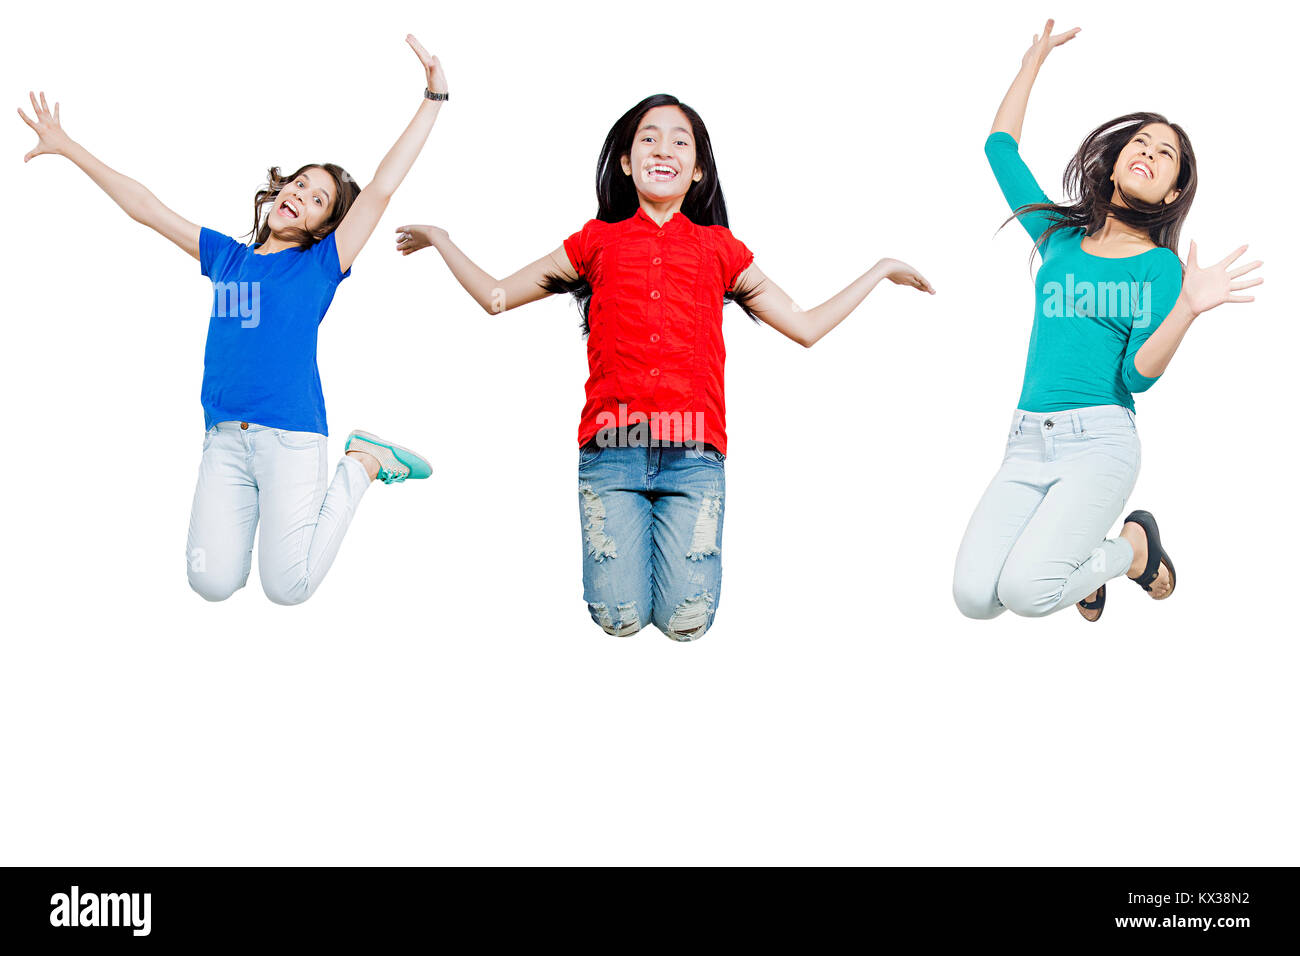 Happy 3 Indian Young Girls Friends Jumping Cheerful Successful Celebrating Stock Photo